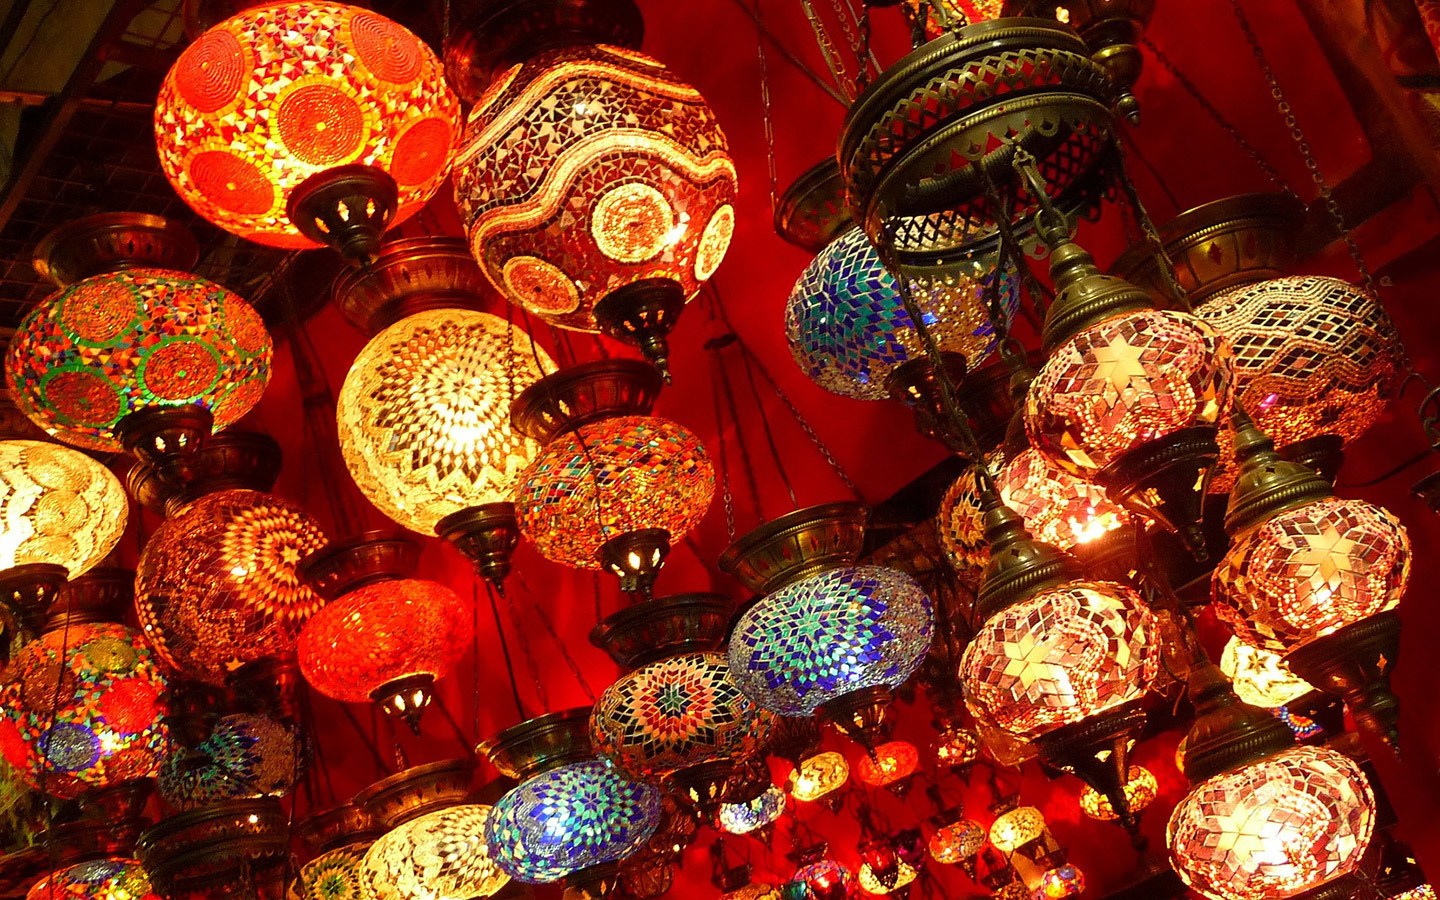 Colouful lanterns in the Grand Bazaar – one day in Istanbul